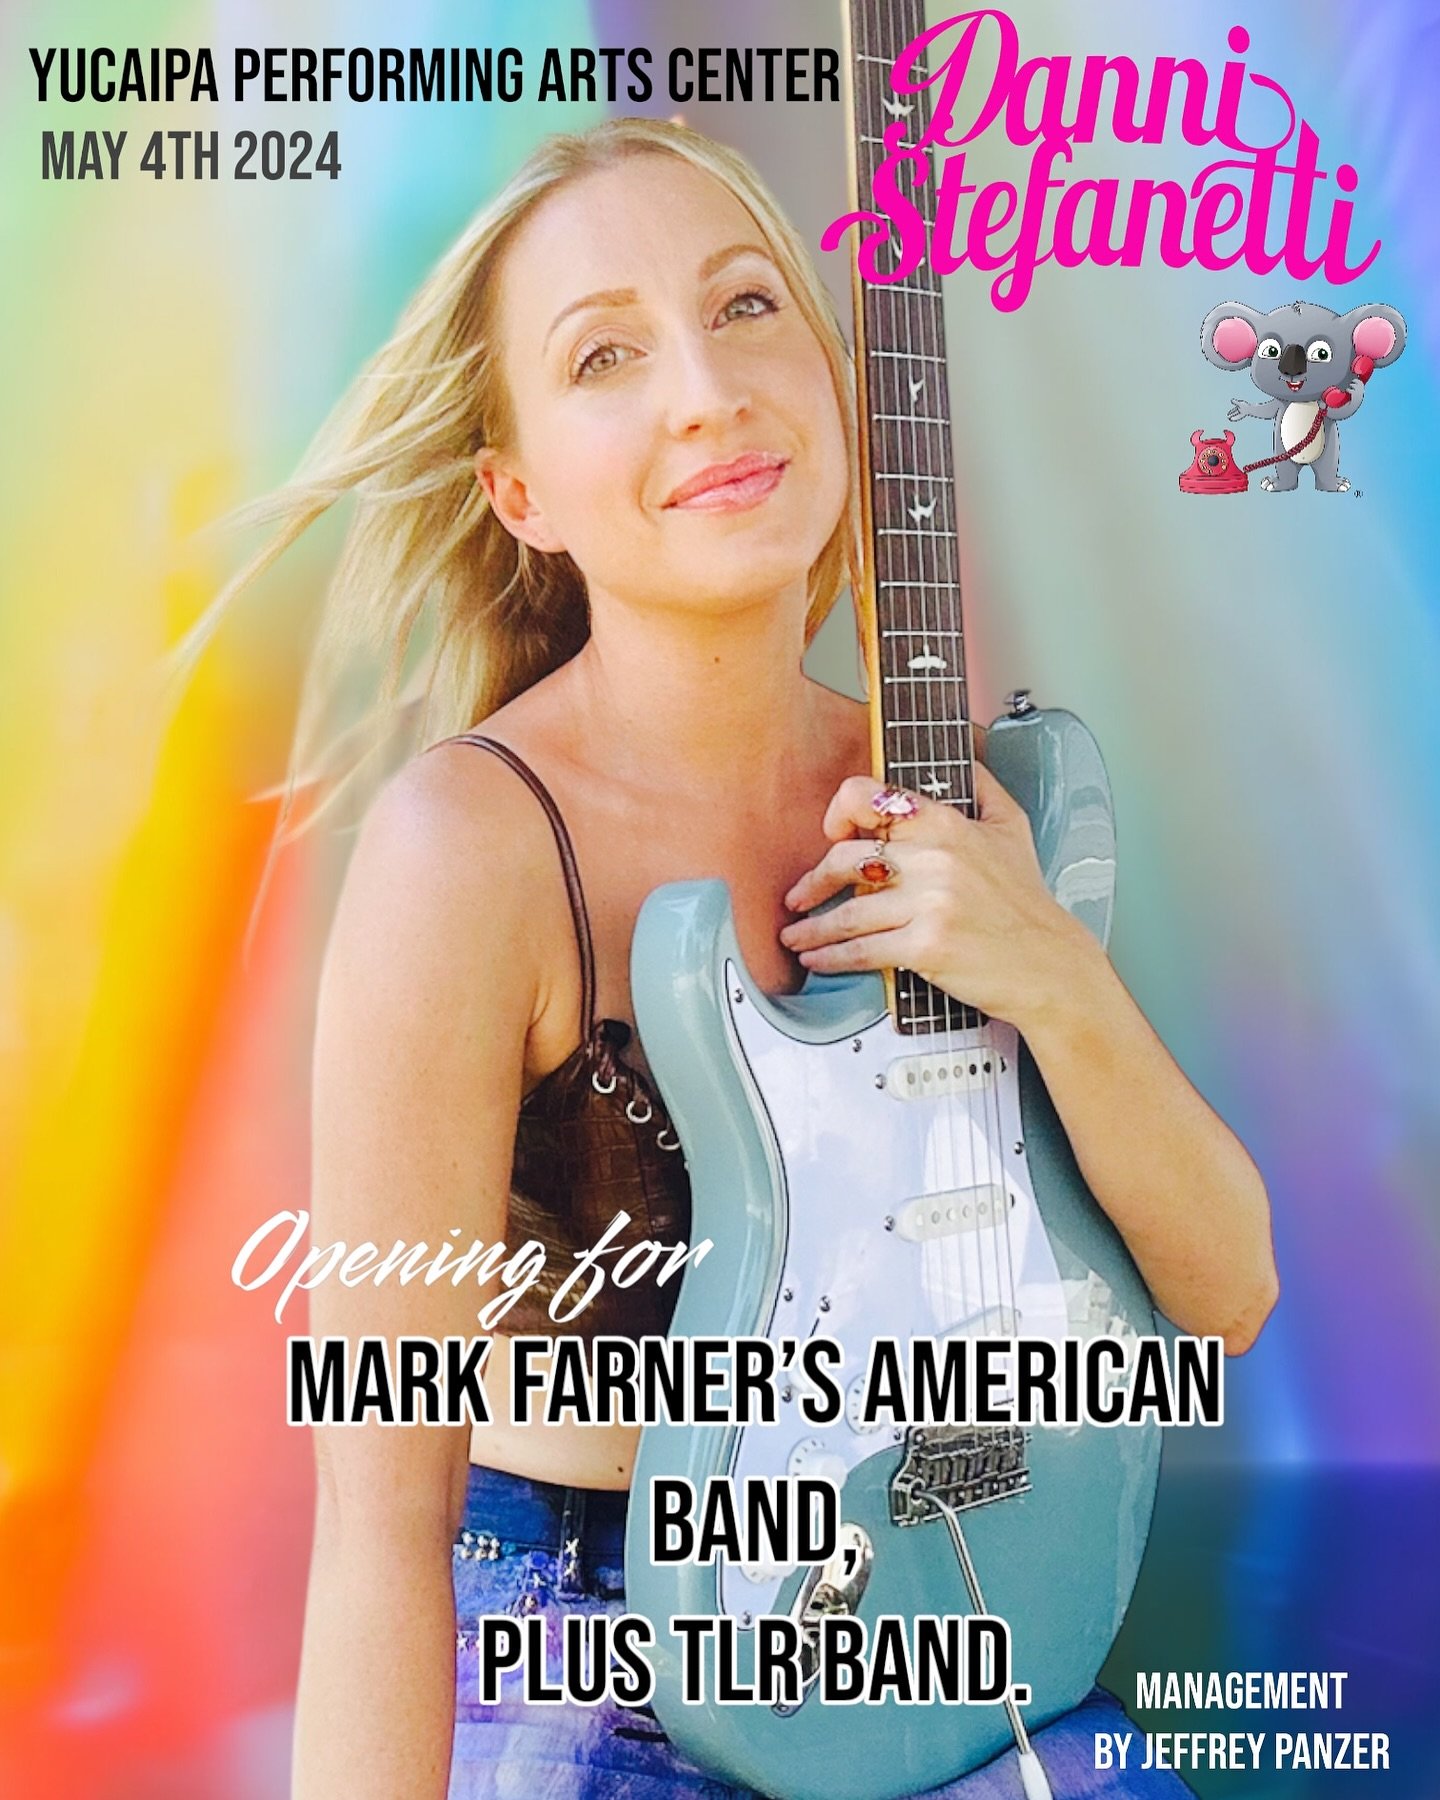 Very thrilled to announce&hellip;..Looking forward to opening for The Legendary Rock n Roll Artist @markfarners_americanband &amp; brilliant @tlreaglestribute at the Yucaipa Performing Arts Center in Yucaipa, CA May 4th, at 4PM
Call, click or visit y